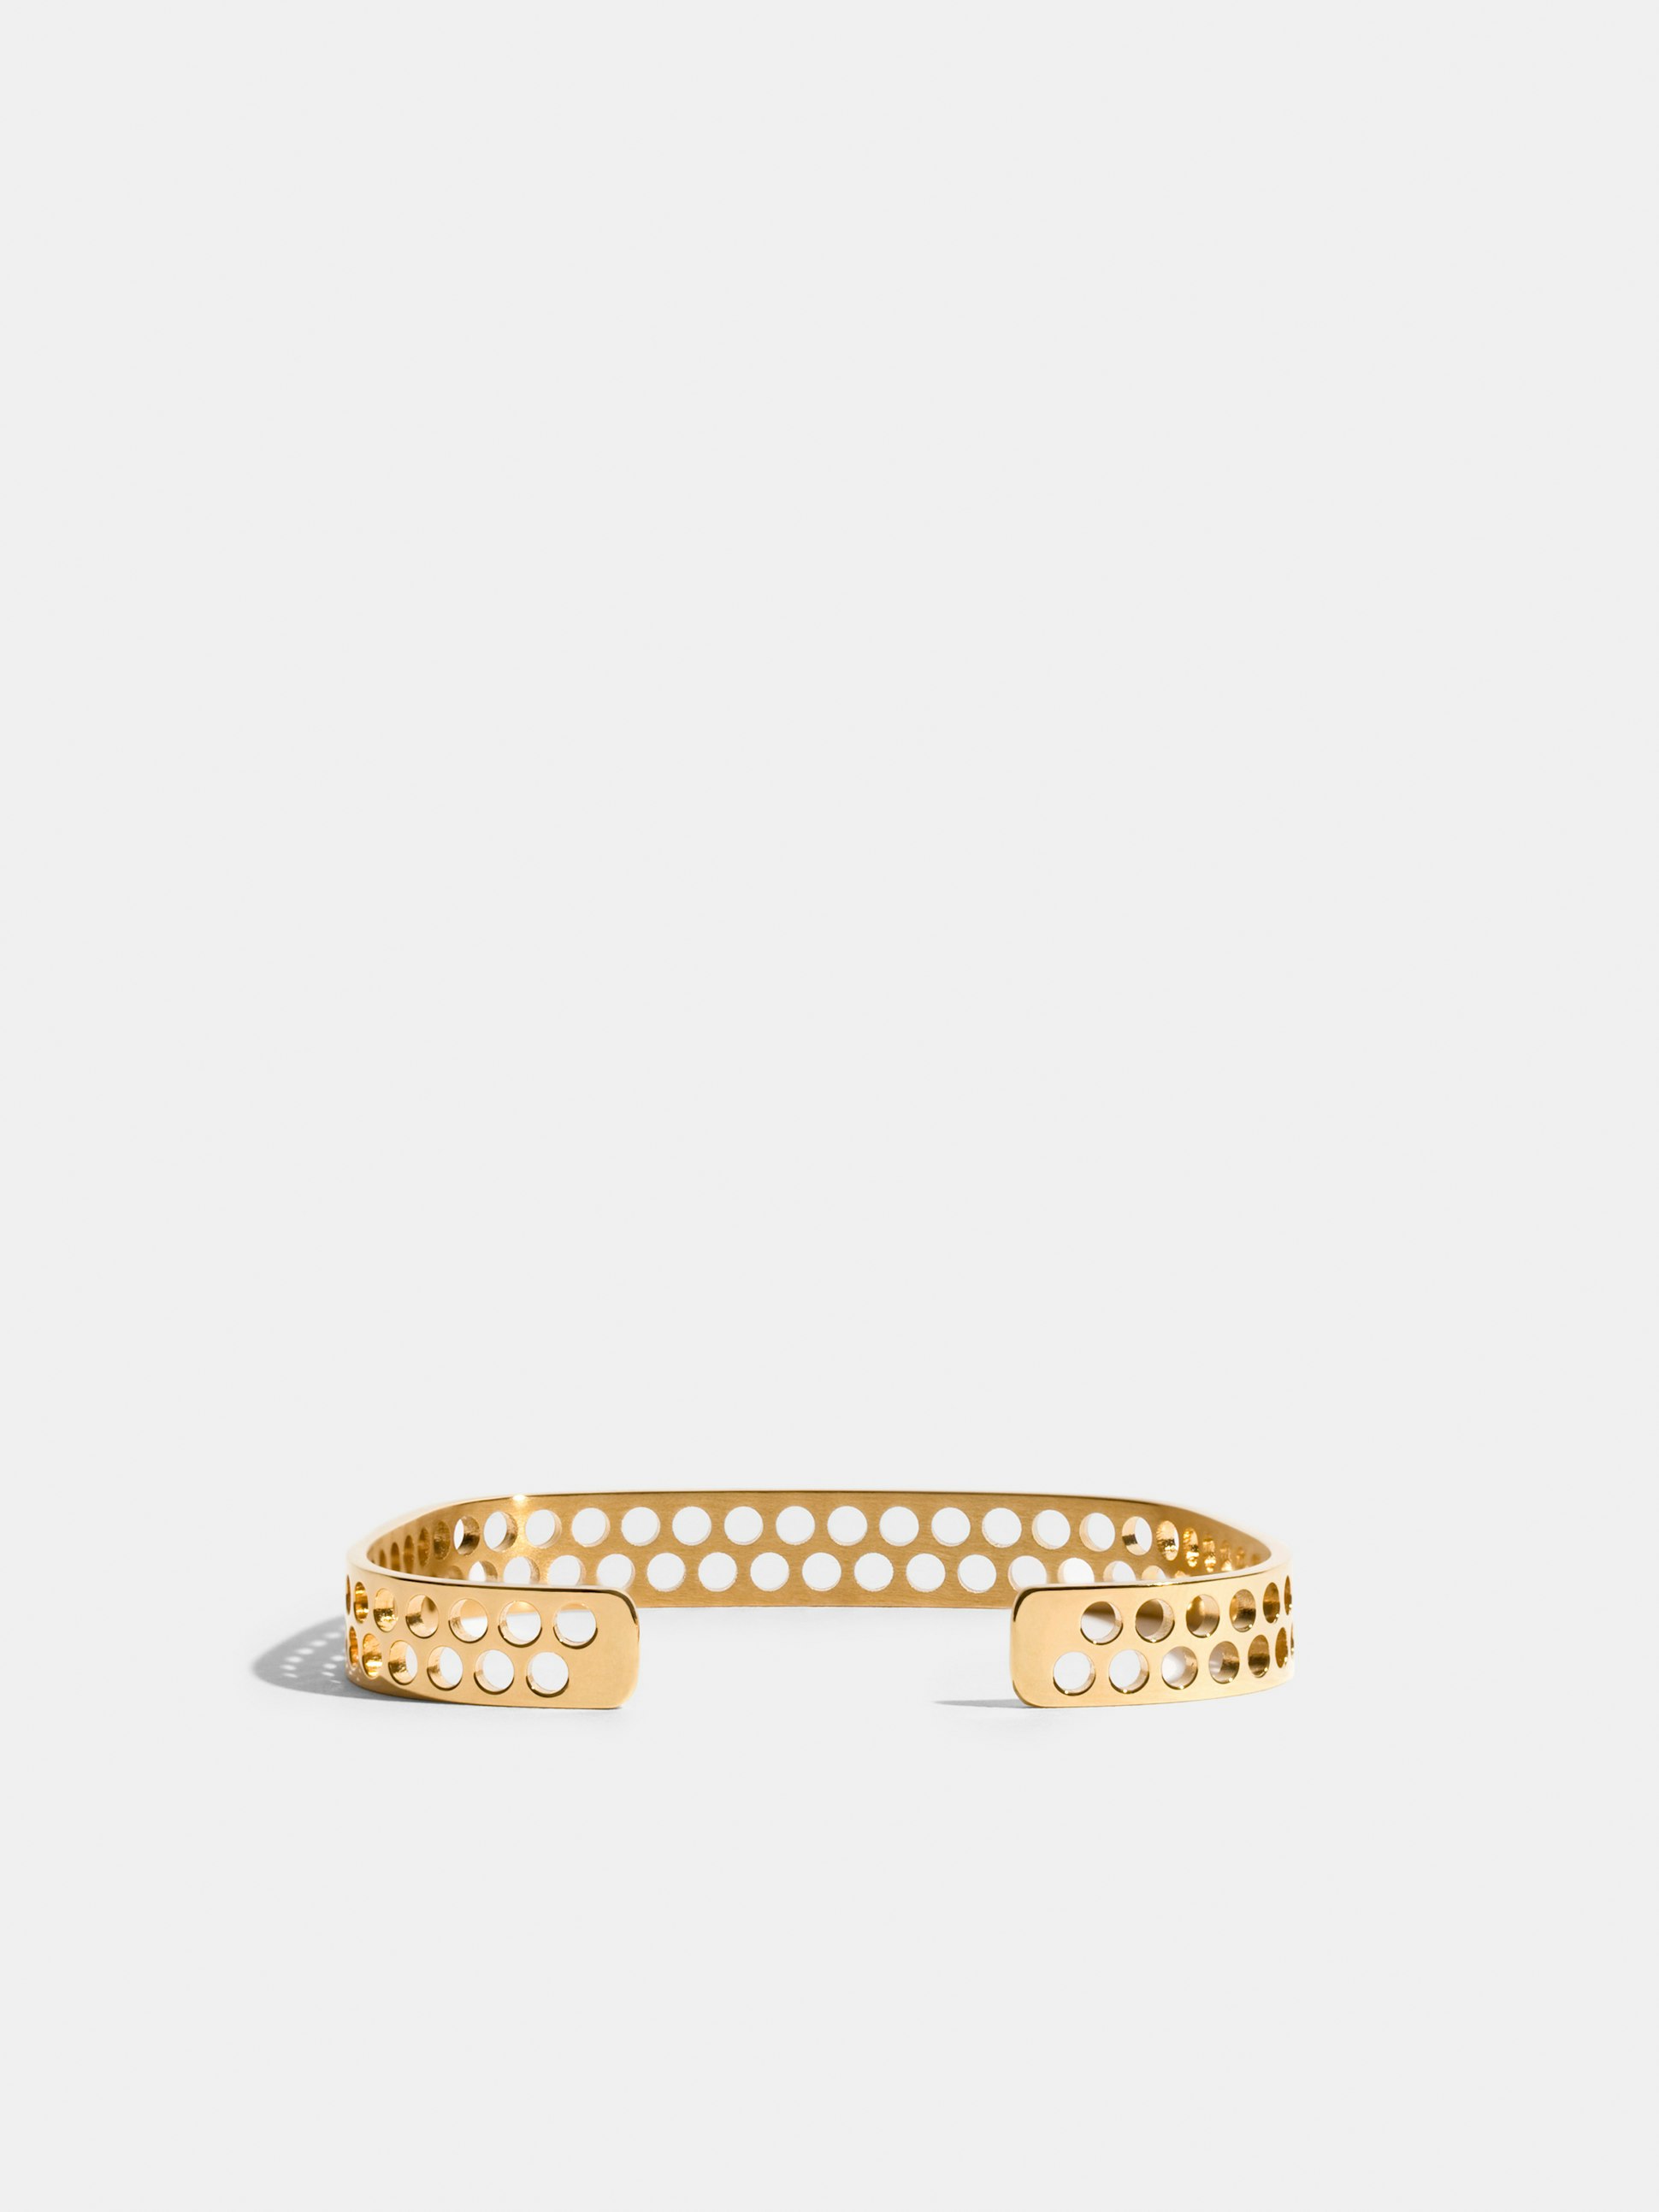 Voids, JEM by India Mahdavi, bracelet IV in 18k Fairmined ethical yellow gold (2 rows, medium perforations)